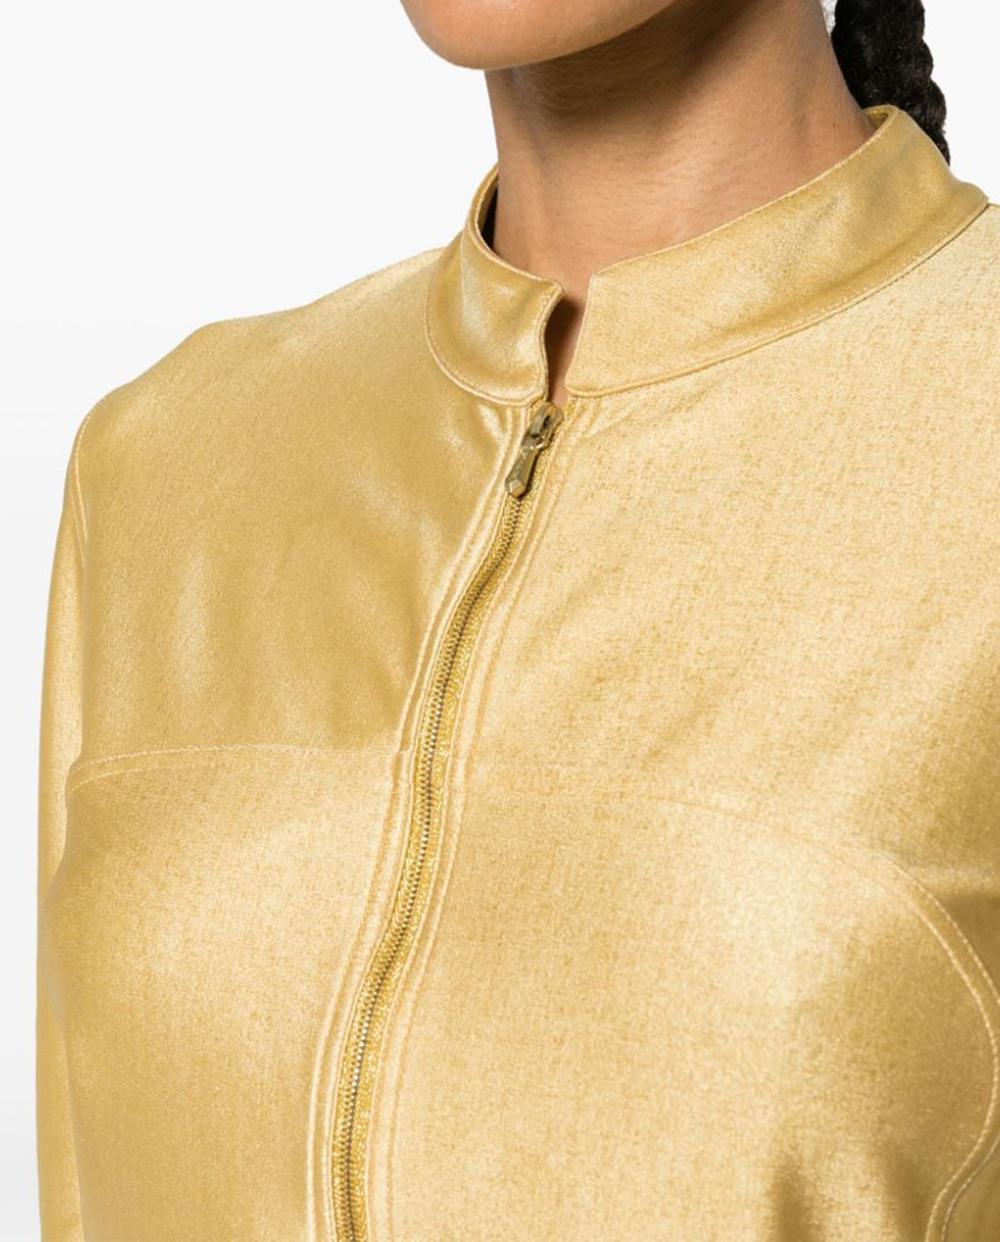 200&, Chanel gold-tone metallic unlined cropped jacket featuring a cropped length, a strech gold-tone jersey fabric,  a metallic finish, a mock neck, a front zip fastening, long sleeves.
Composition: Nylon 80%, Spandex/Elastane 20%
Circa